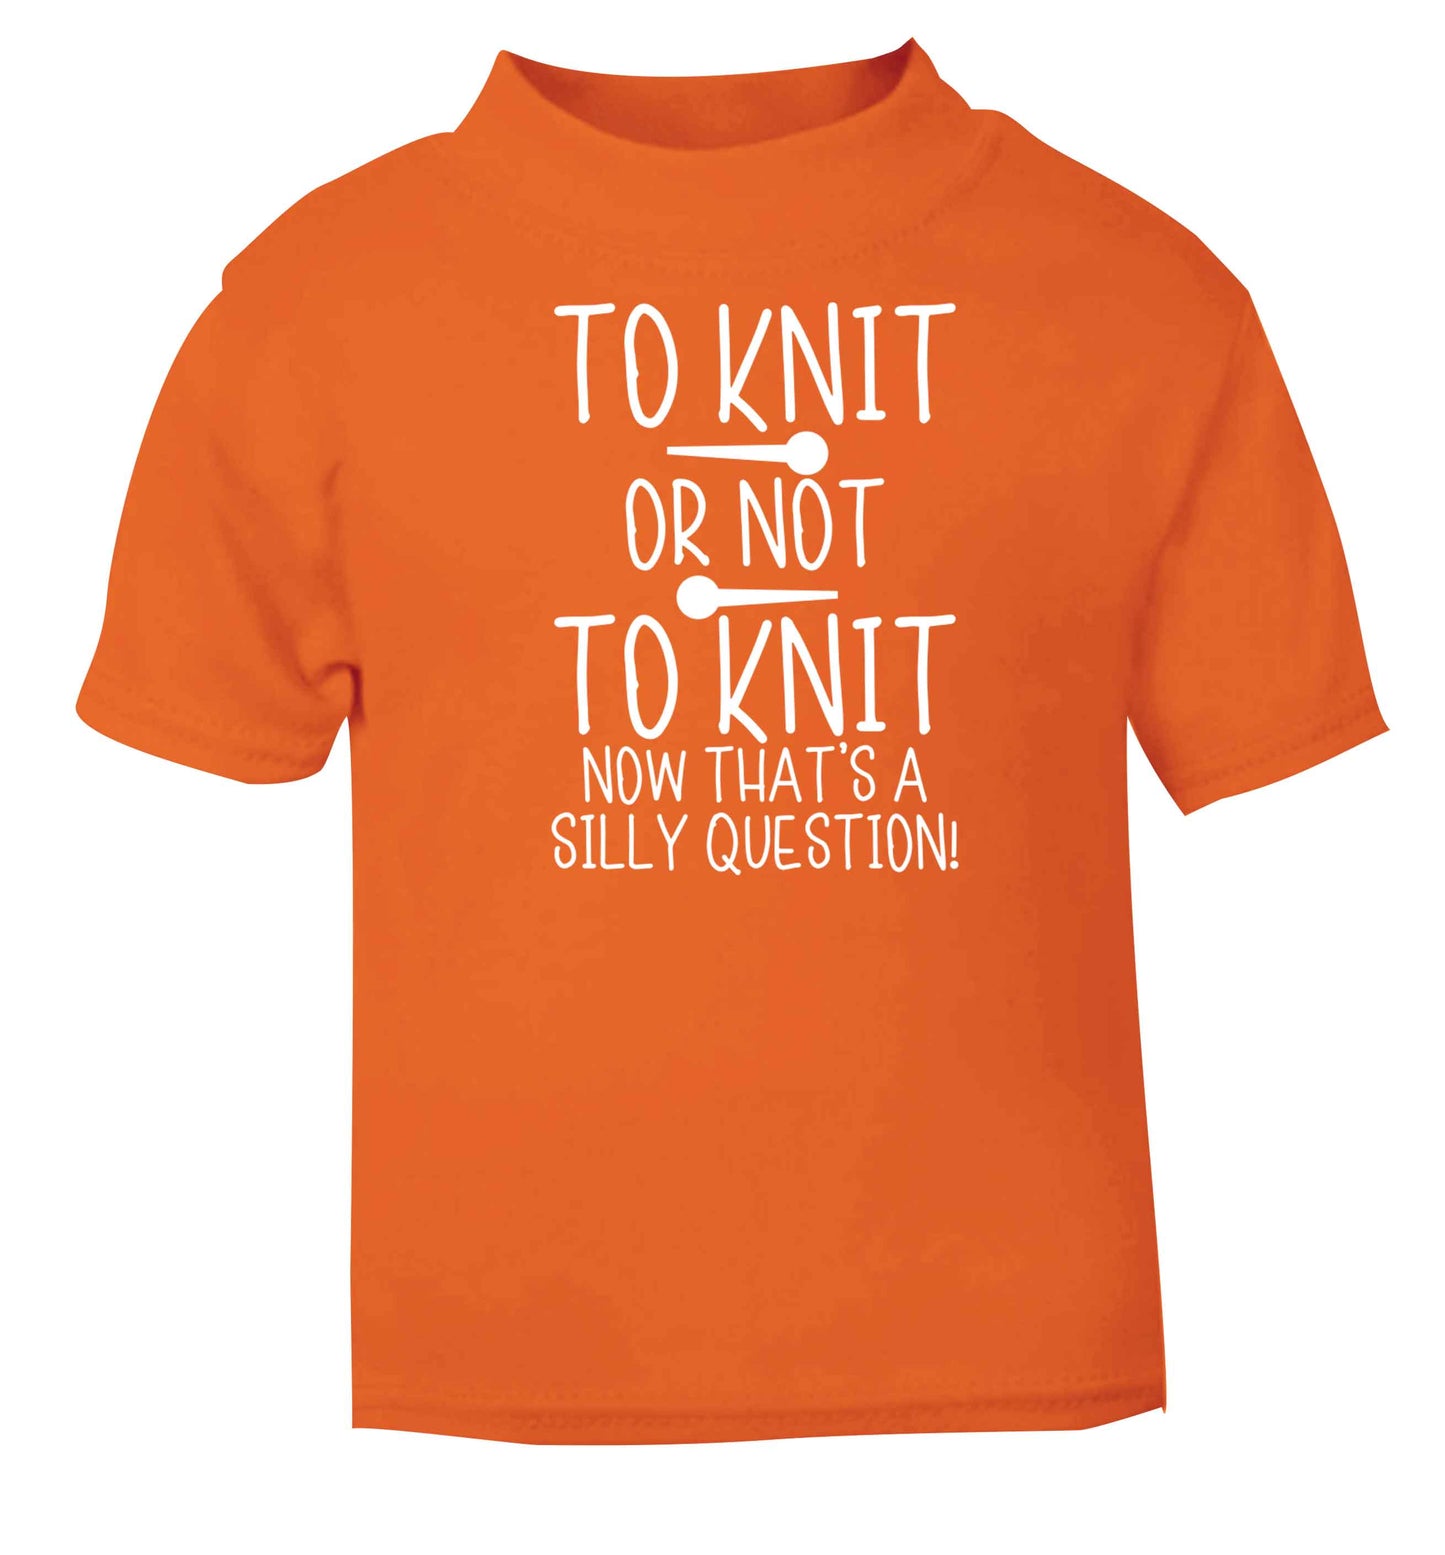 To knit or not to knit now that's a silly question orange baby toddler Tshirt 2 Years